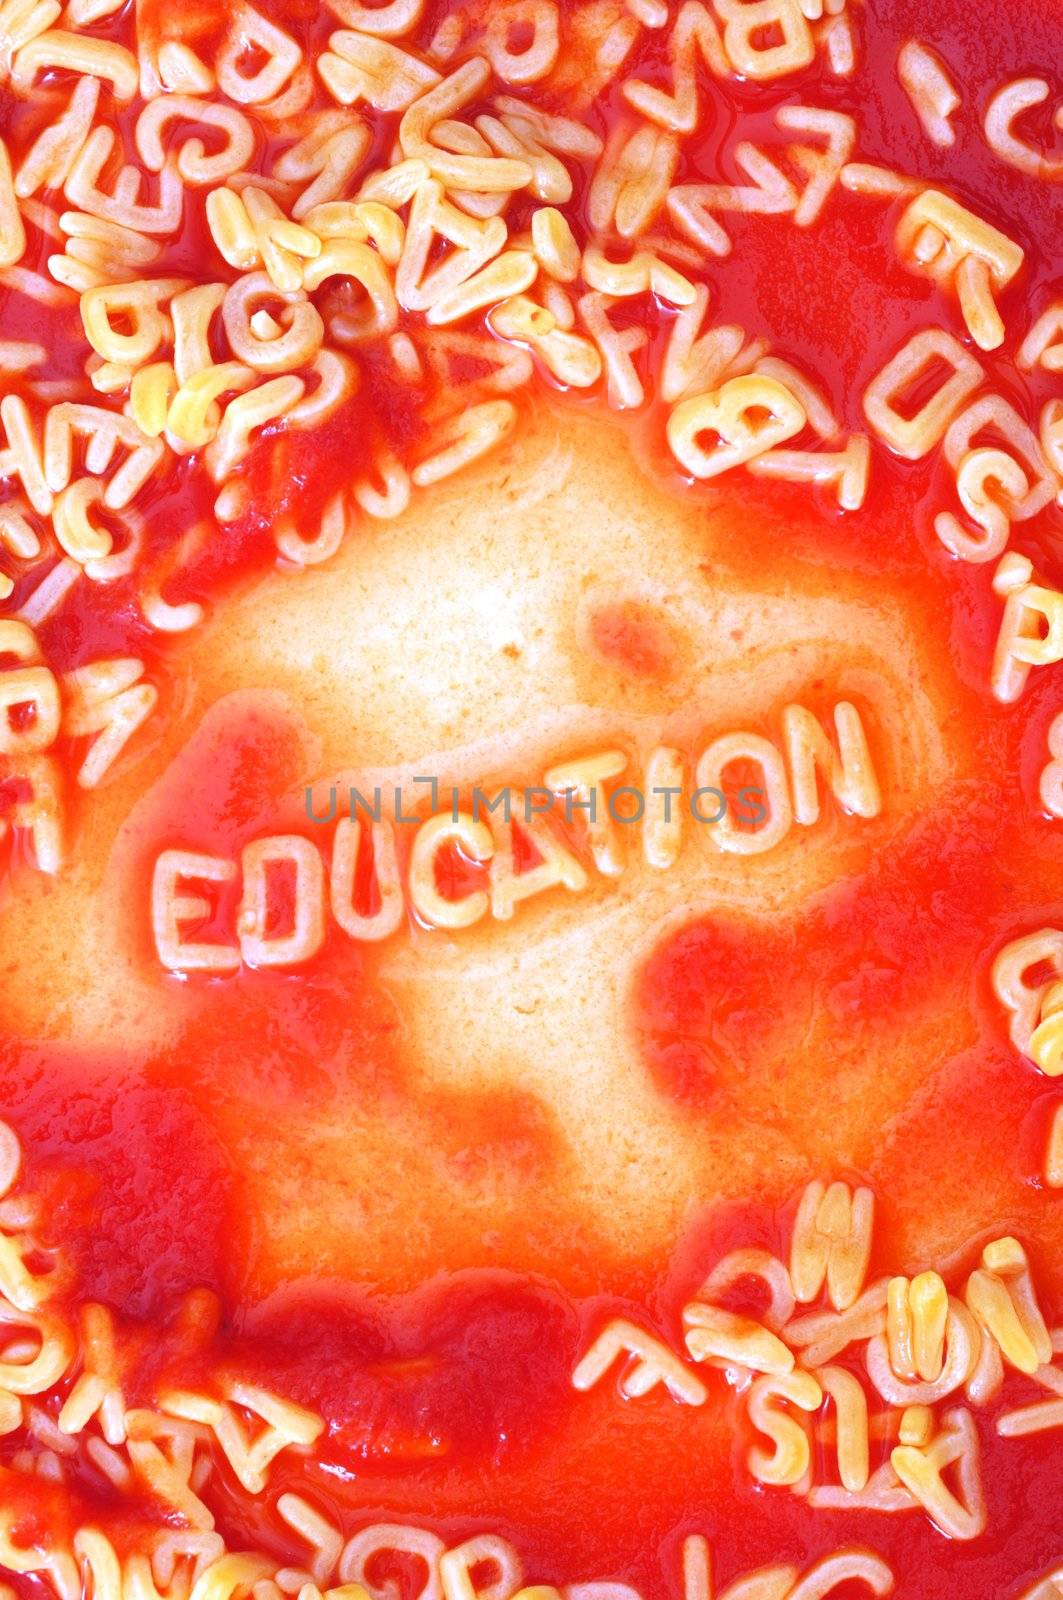 school education concept with red pasta alphabet